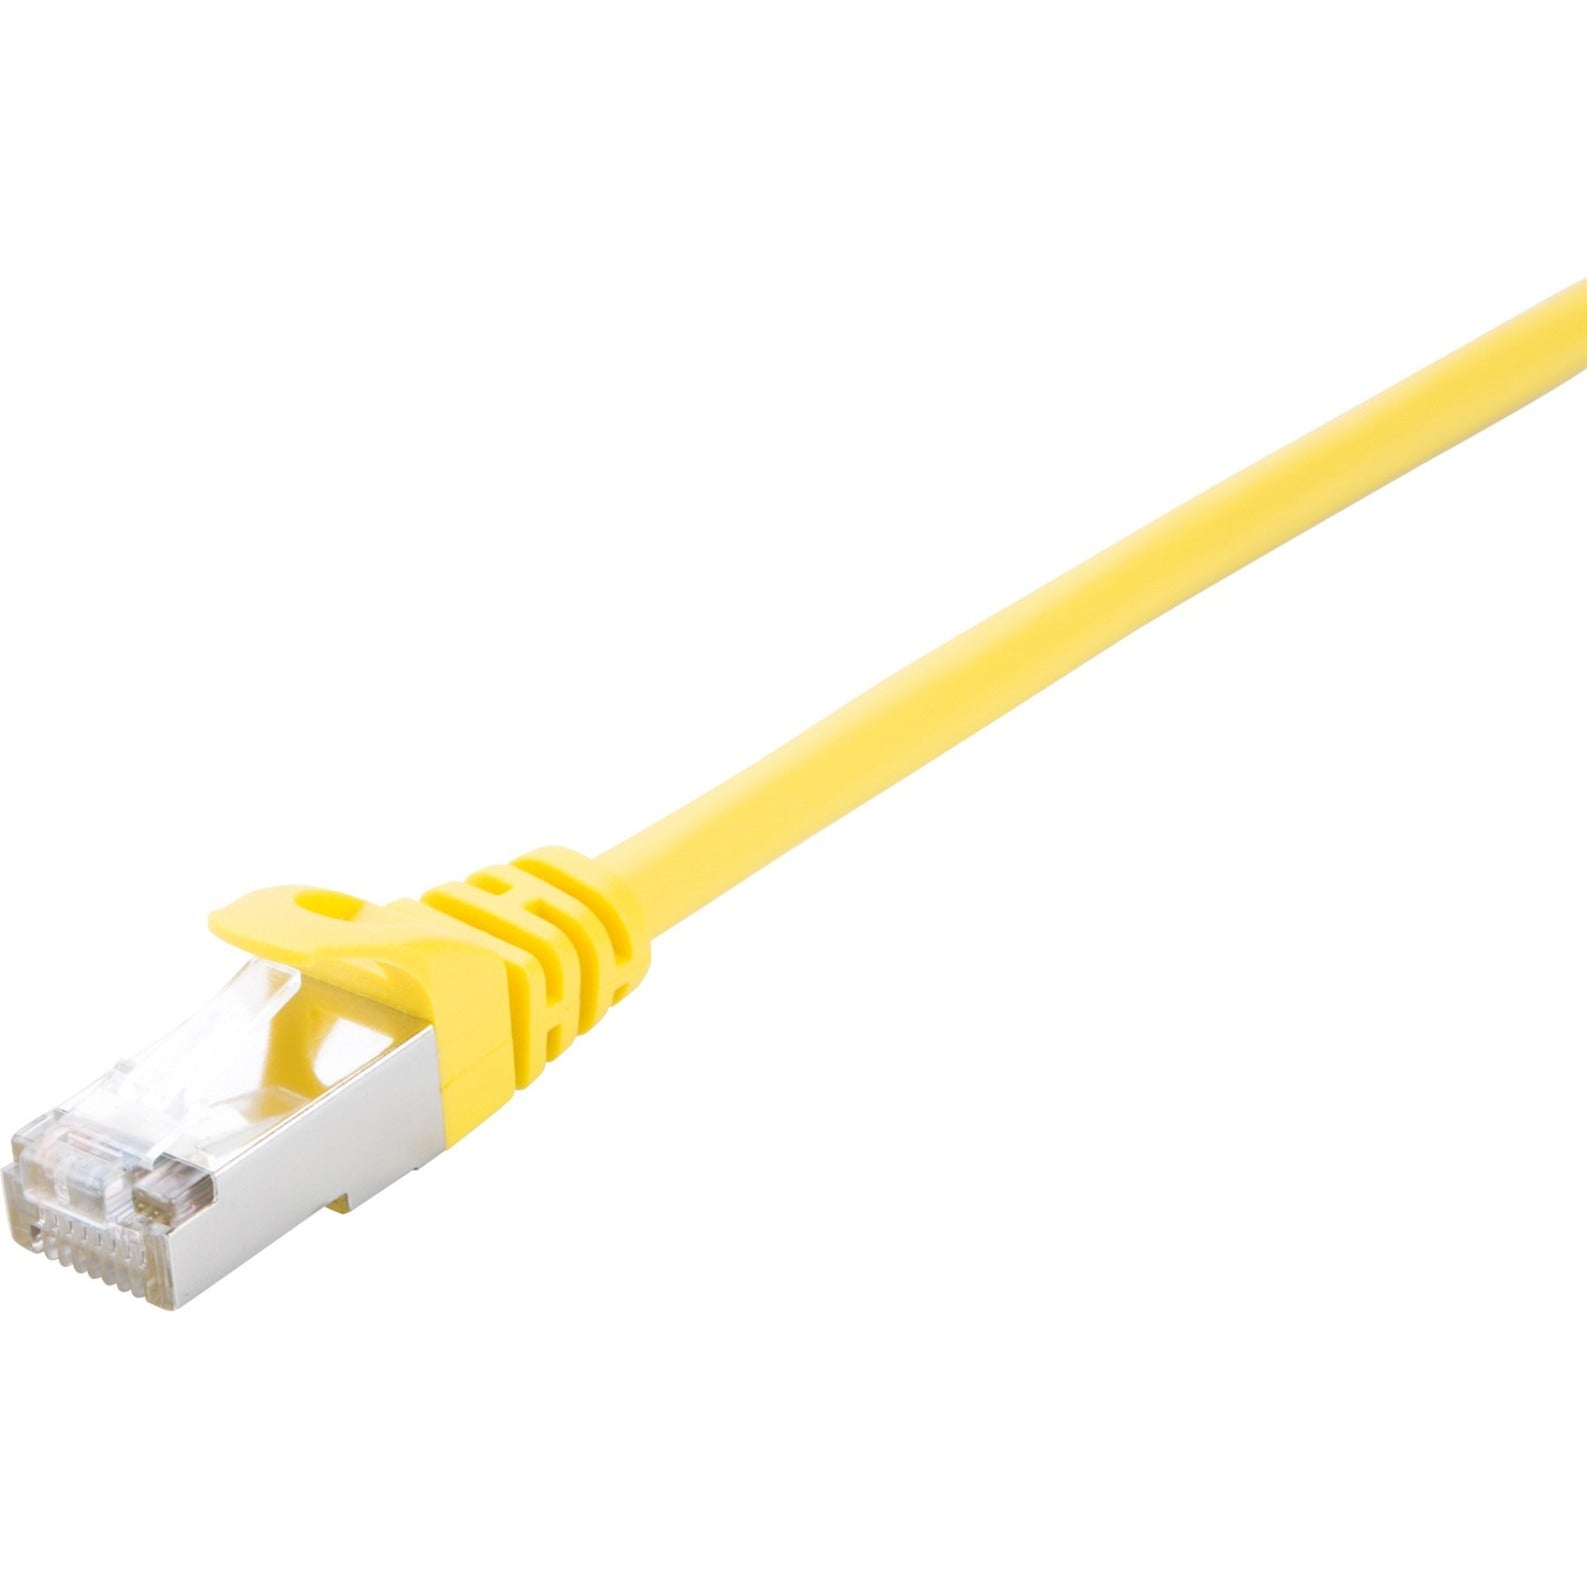 V7 V7CAT5STP-03M-YLW-1N Yellow Cat5e Shielded (STP) Cable RJ45 Male to RJ45 Male 3m 10ft, Molded, Snagless, Noise Reducing